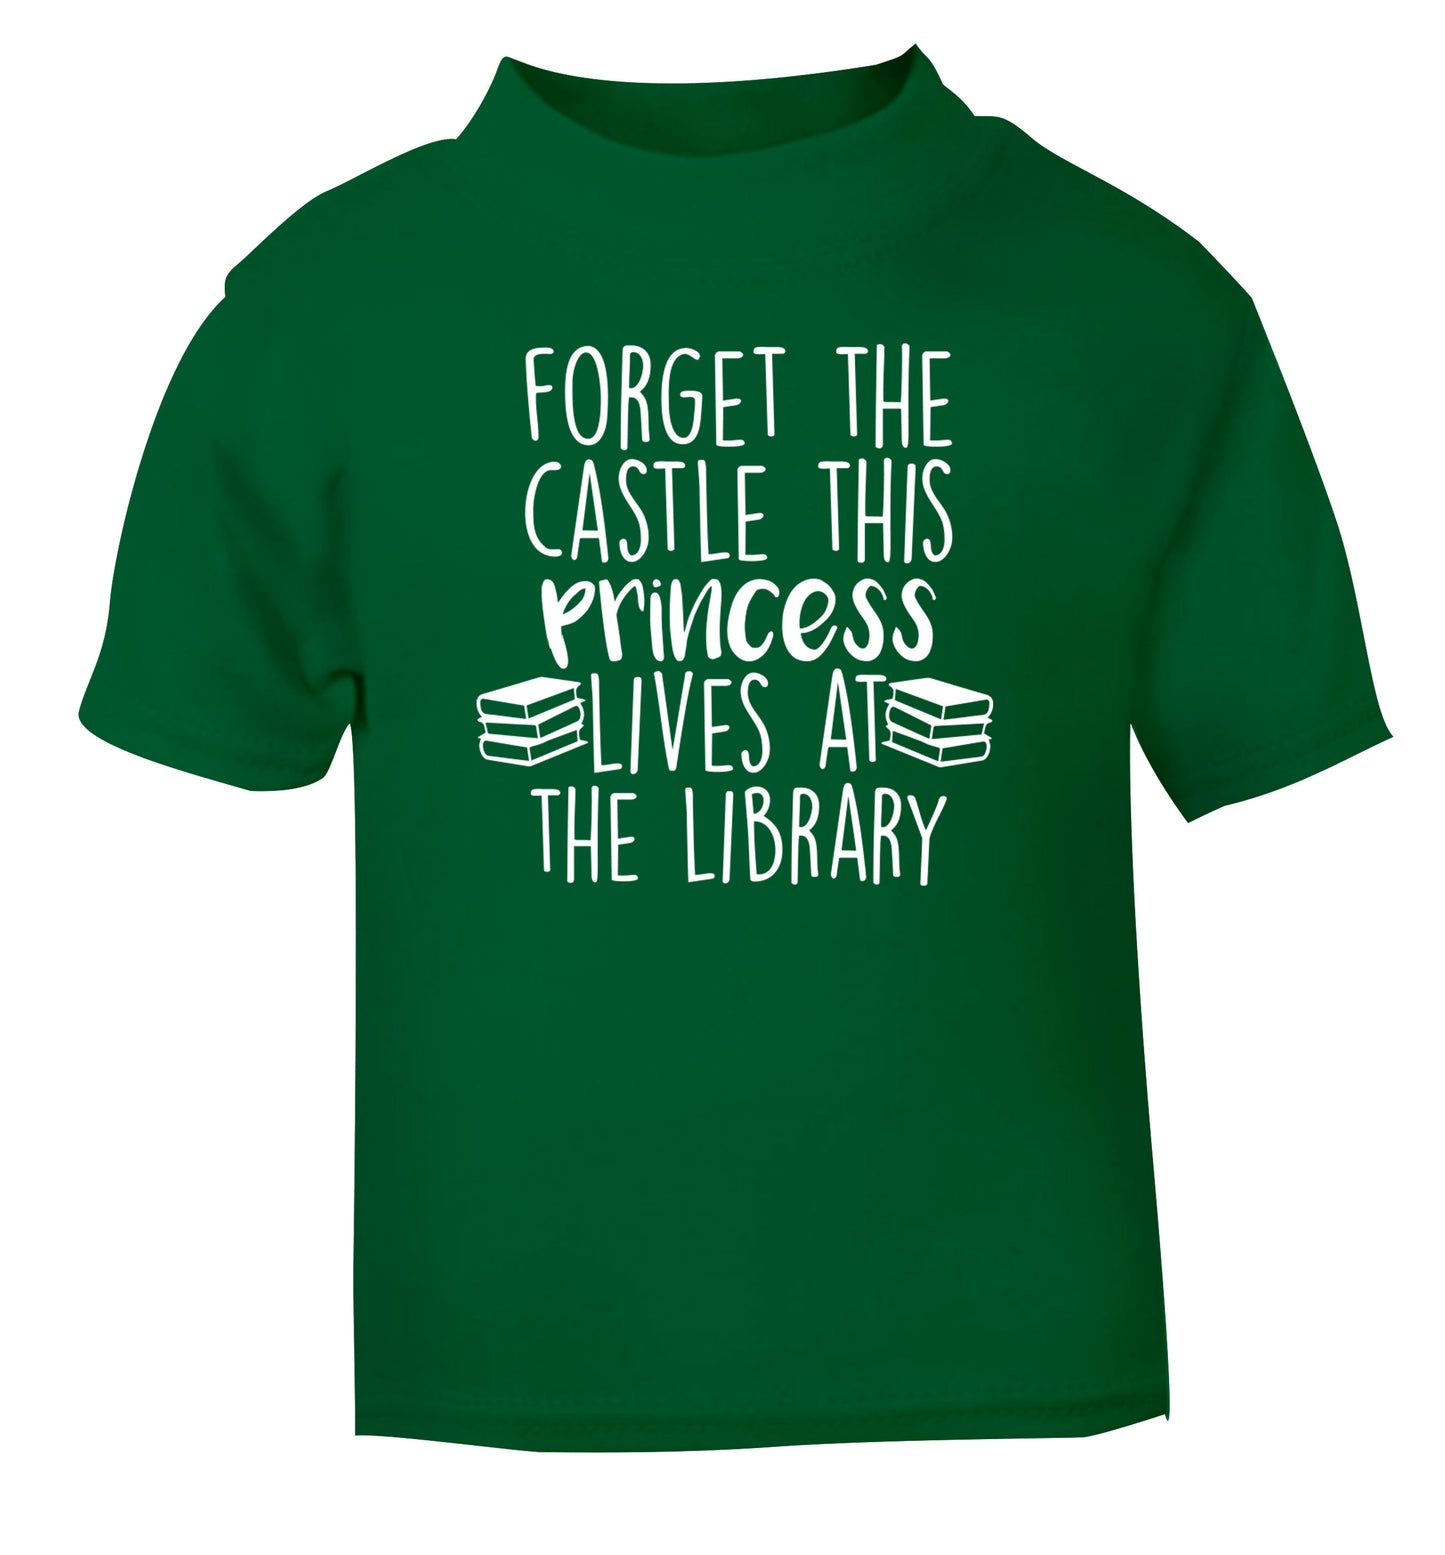 Forget the castle this princess lives at the library green Baby Toddler Tshirt 2 Years